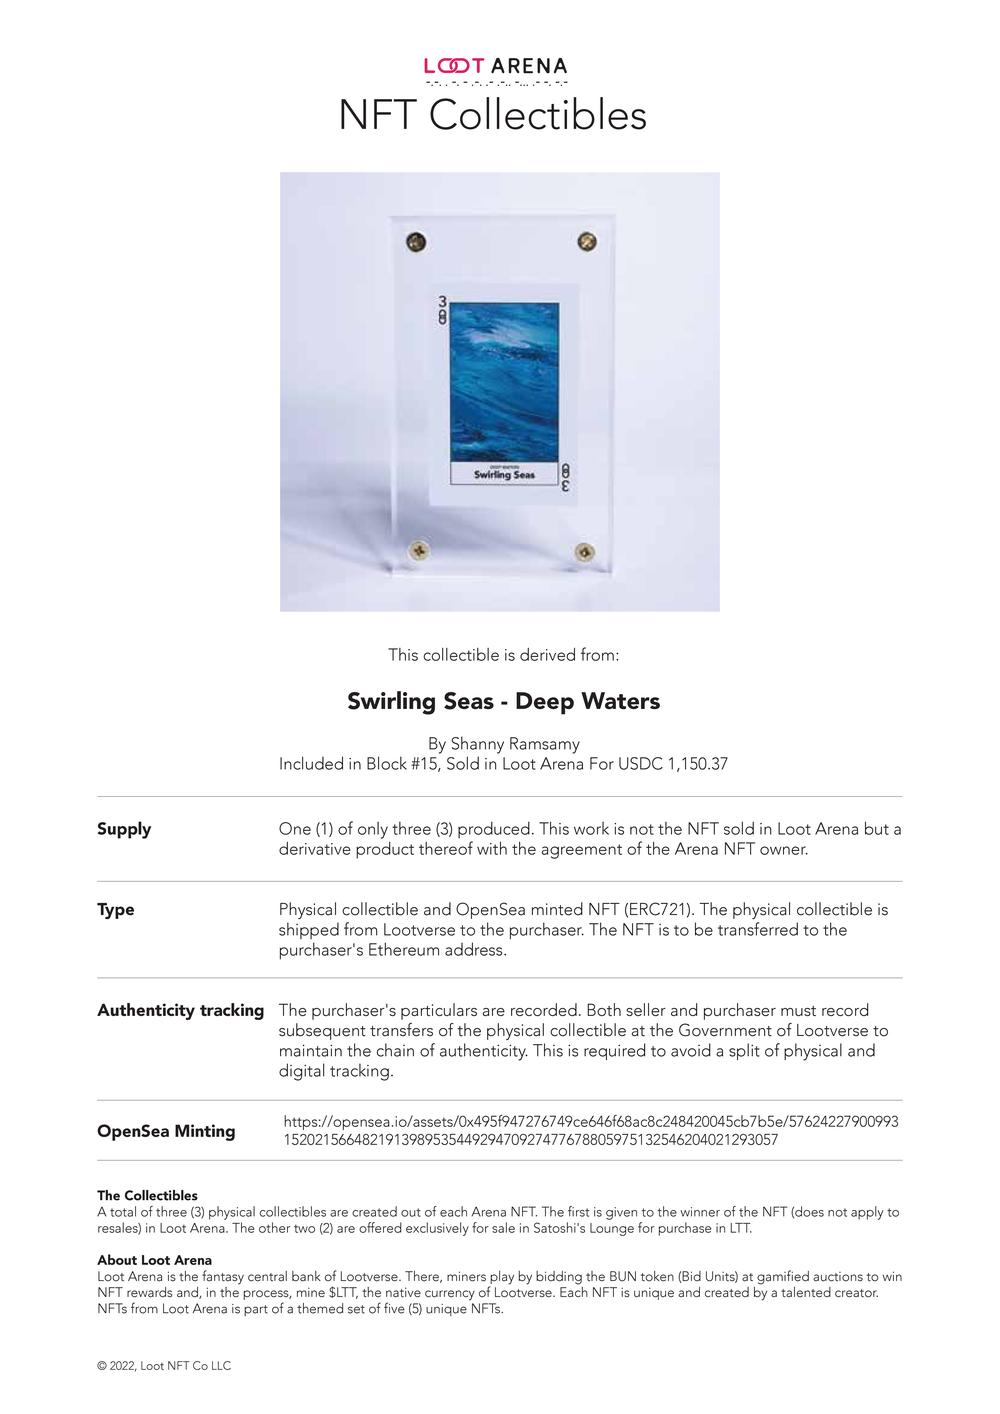 Swirling Seas_#1 Collectible_Contract.pdf